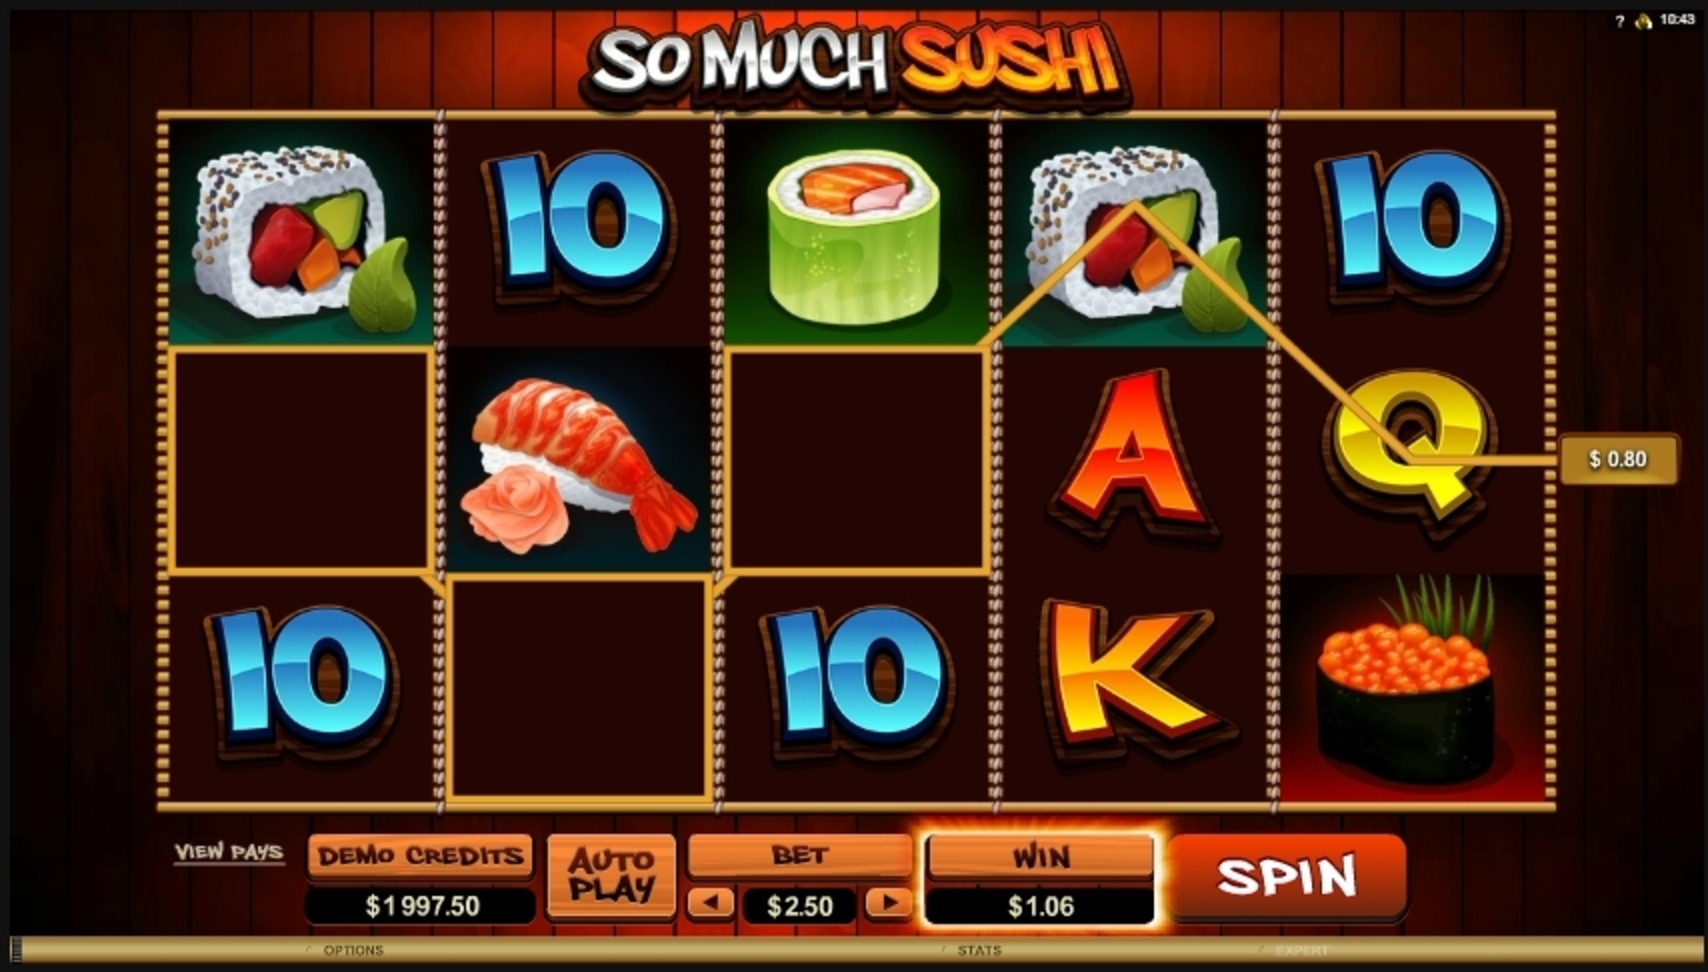 Win Money in So Much Sushi Free Slot Game by Microgaming